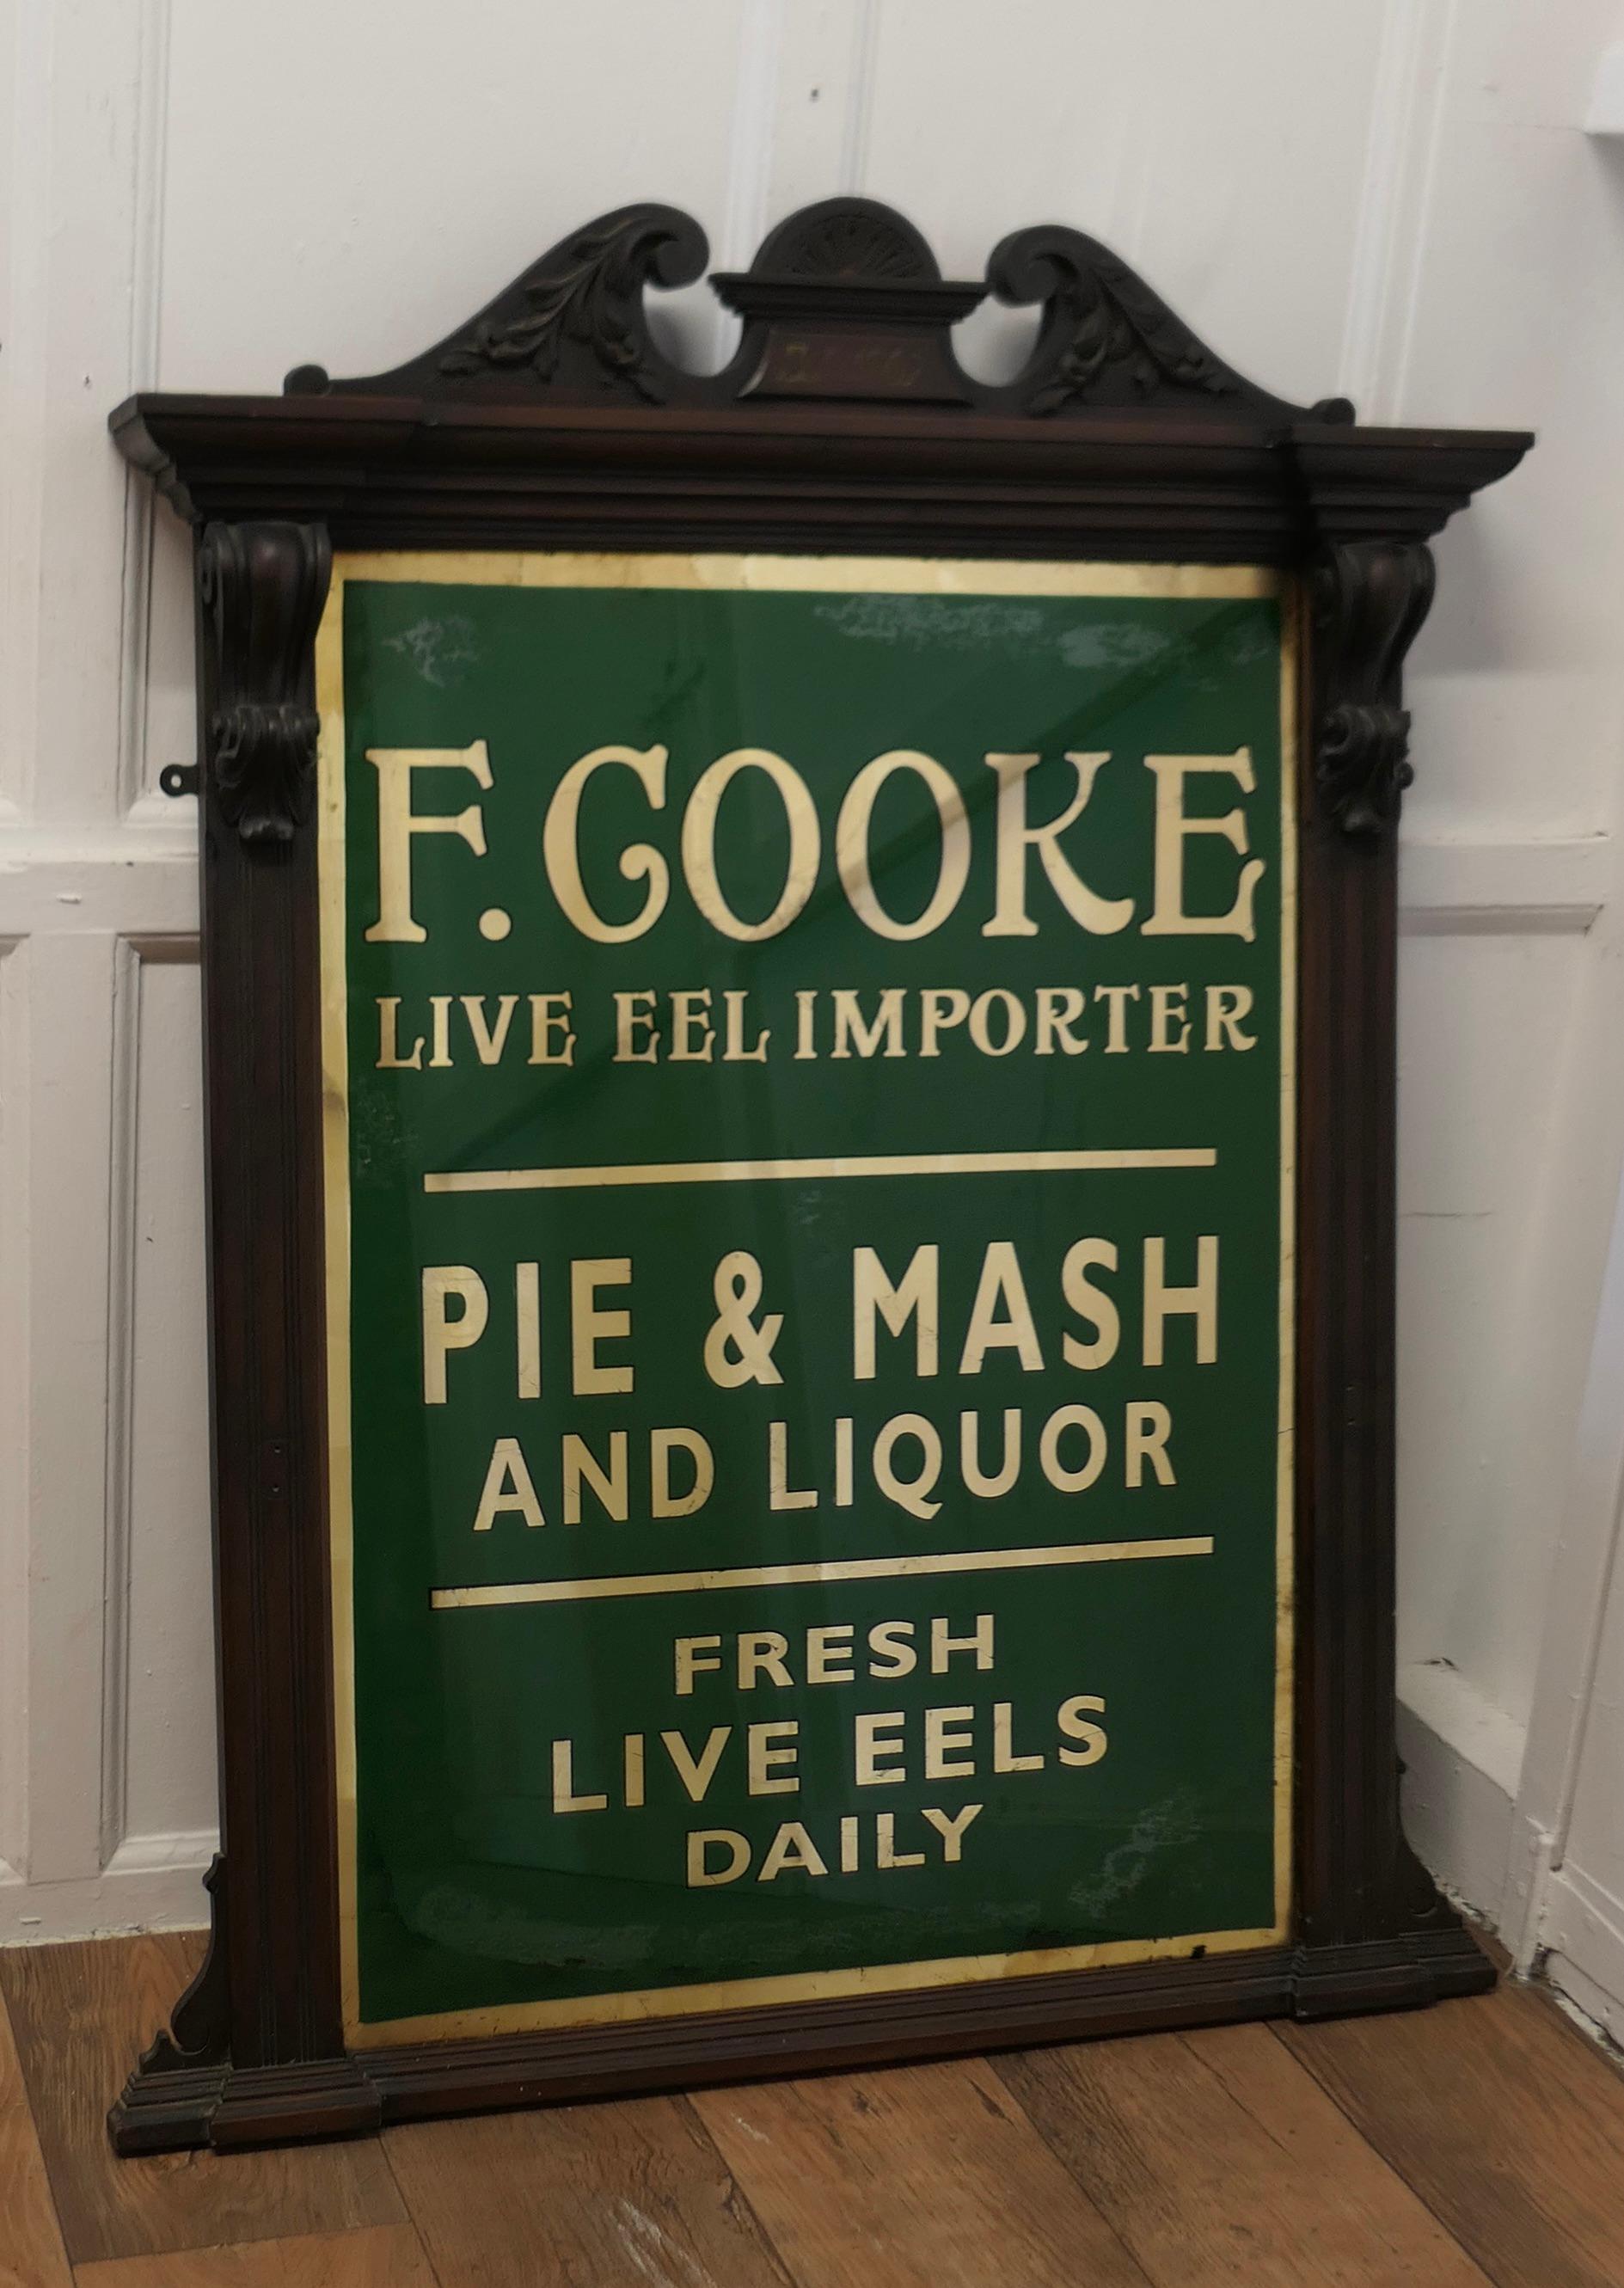  19th Century Eel and Pie Shop Advertising Wall Mirror Sign

The Mirror Glass is Green with Gold Leaf Lettering on the reverse 

The Glass is in quite good condition with some very minor blemishes on the reverse side, it is set in a Carved Frame